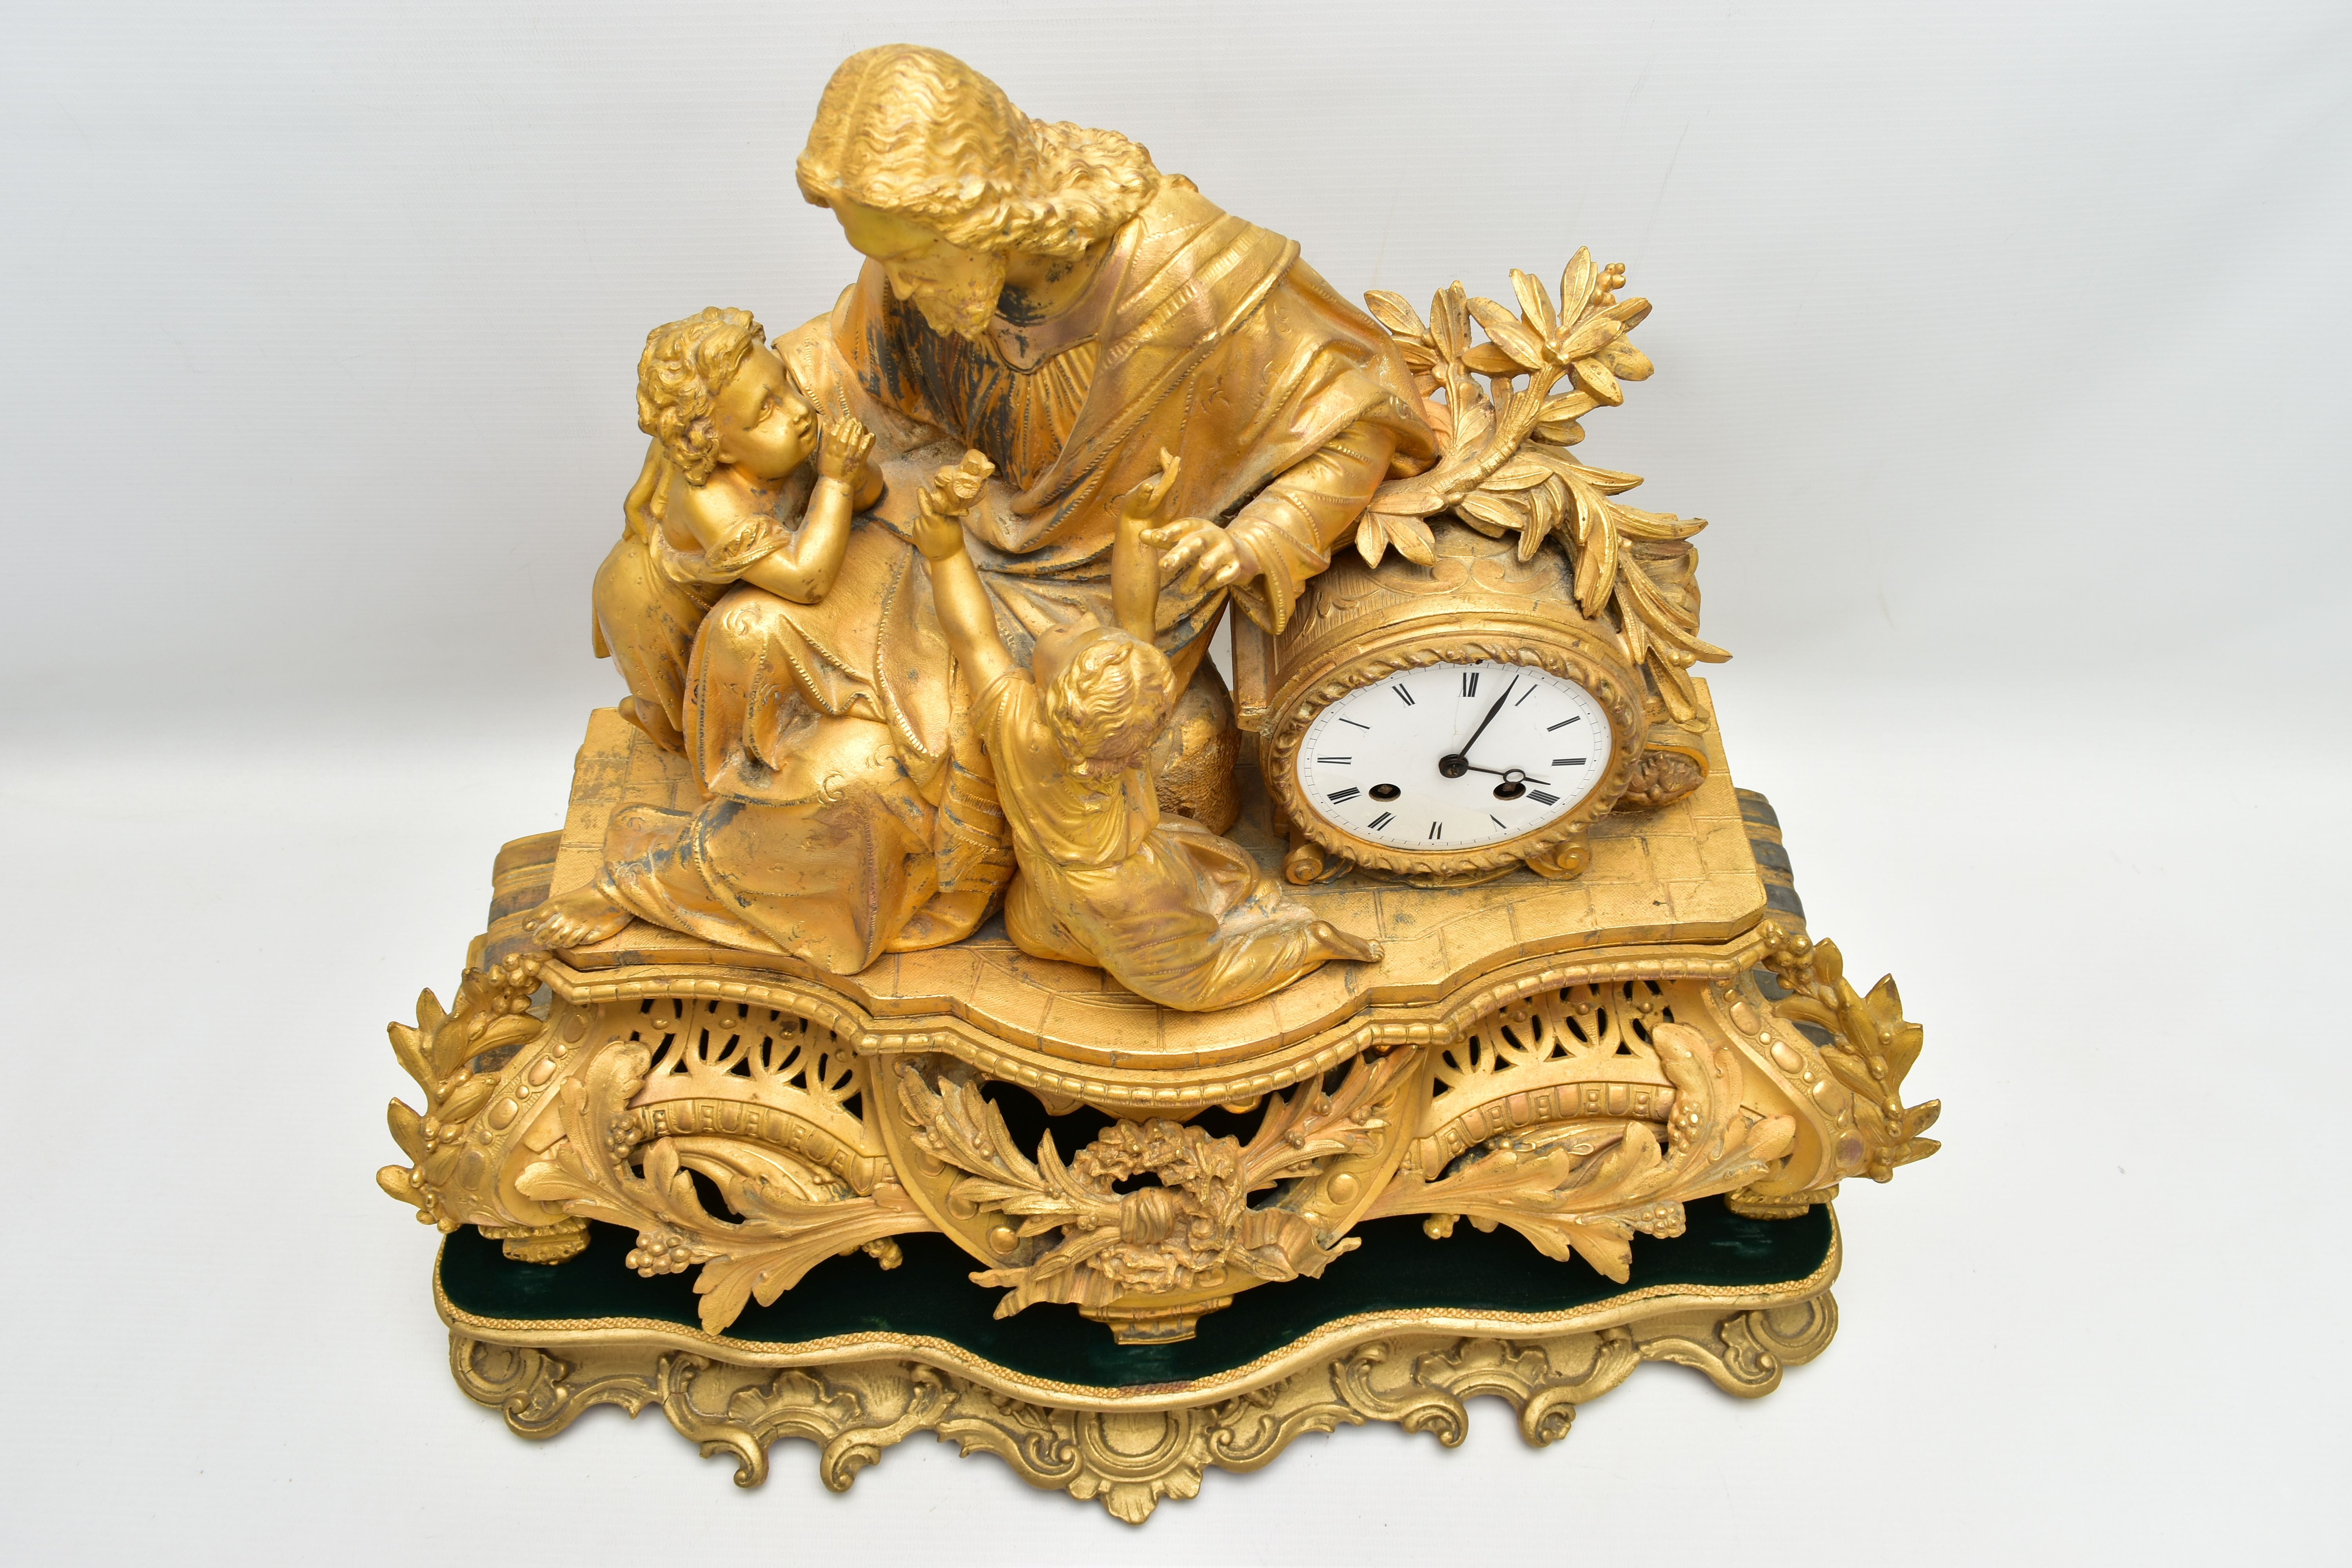 A MID 19TH CENTURY GILT METAL MANTEL CLOCK, cast with a seated figure of Christ and two children, - Image 5 of 11